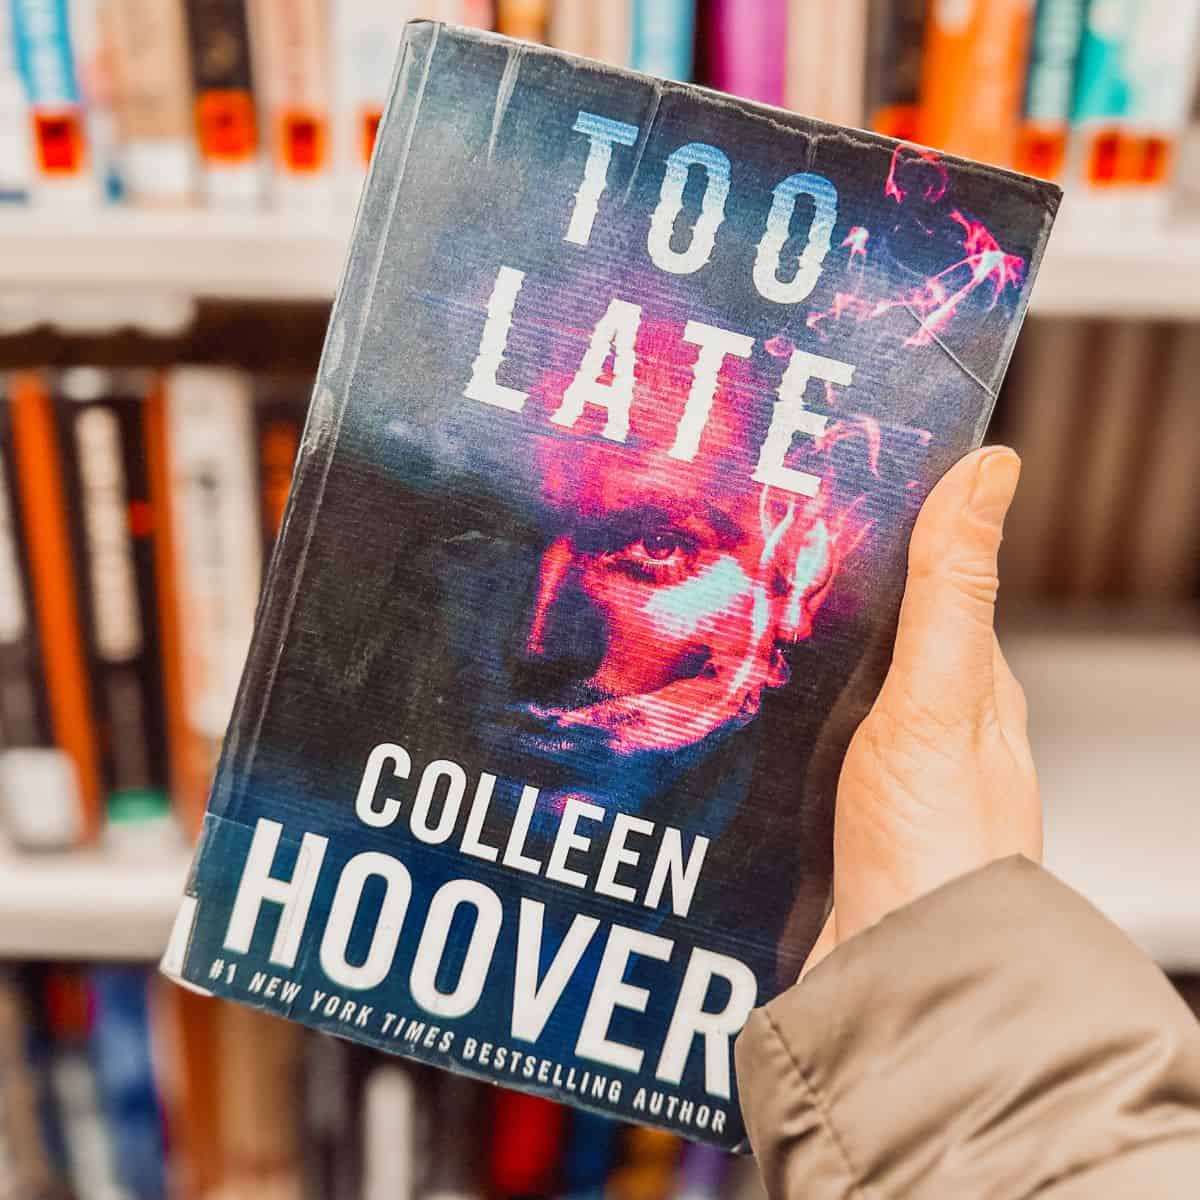 Too Late by Colleen Hoover: Summary and Ending Explained